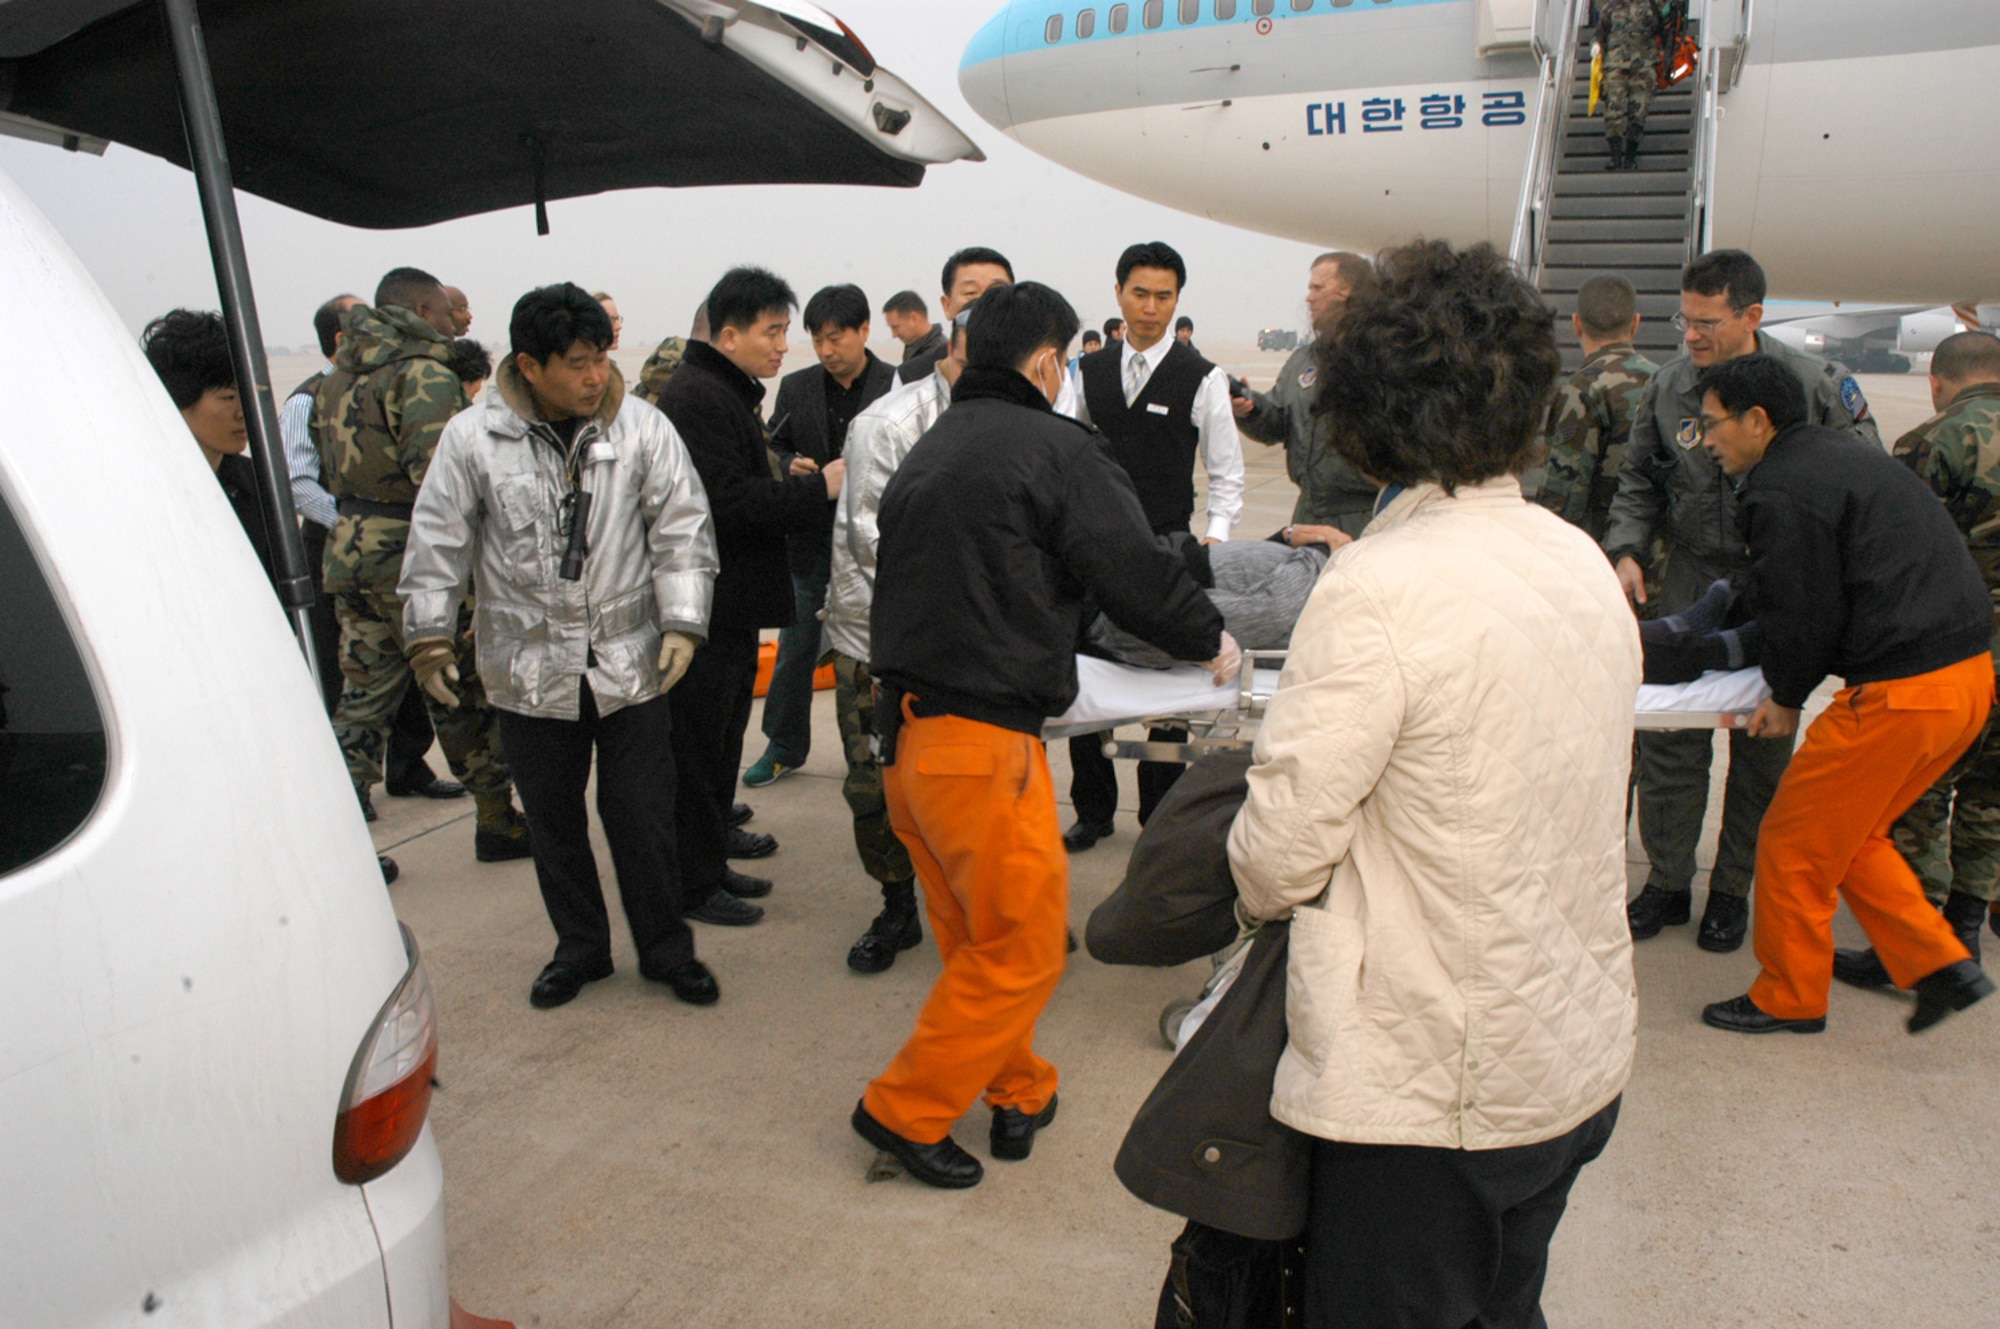 Medical and security personnel rush a 65-year old Korean man needing medical attention to an ambulance after his Korean Airline flight was diverted to Kunsan from Incheon International Airport. The passenger airliner, with 274 people on board, diverted to Kunsan because of poor weather conditions at Incheon. The Korean man was transported to Kunsan Medical Center in downtown Kunsan City. The passengers were offered bottled water as they waited to take off, and the aircraft was refueled by Air Force personnel. (U.S. Air Force photo/Staff Sgt. Nathan Gallahan) 